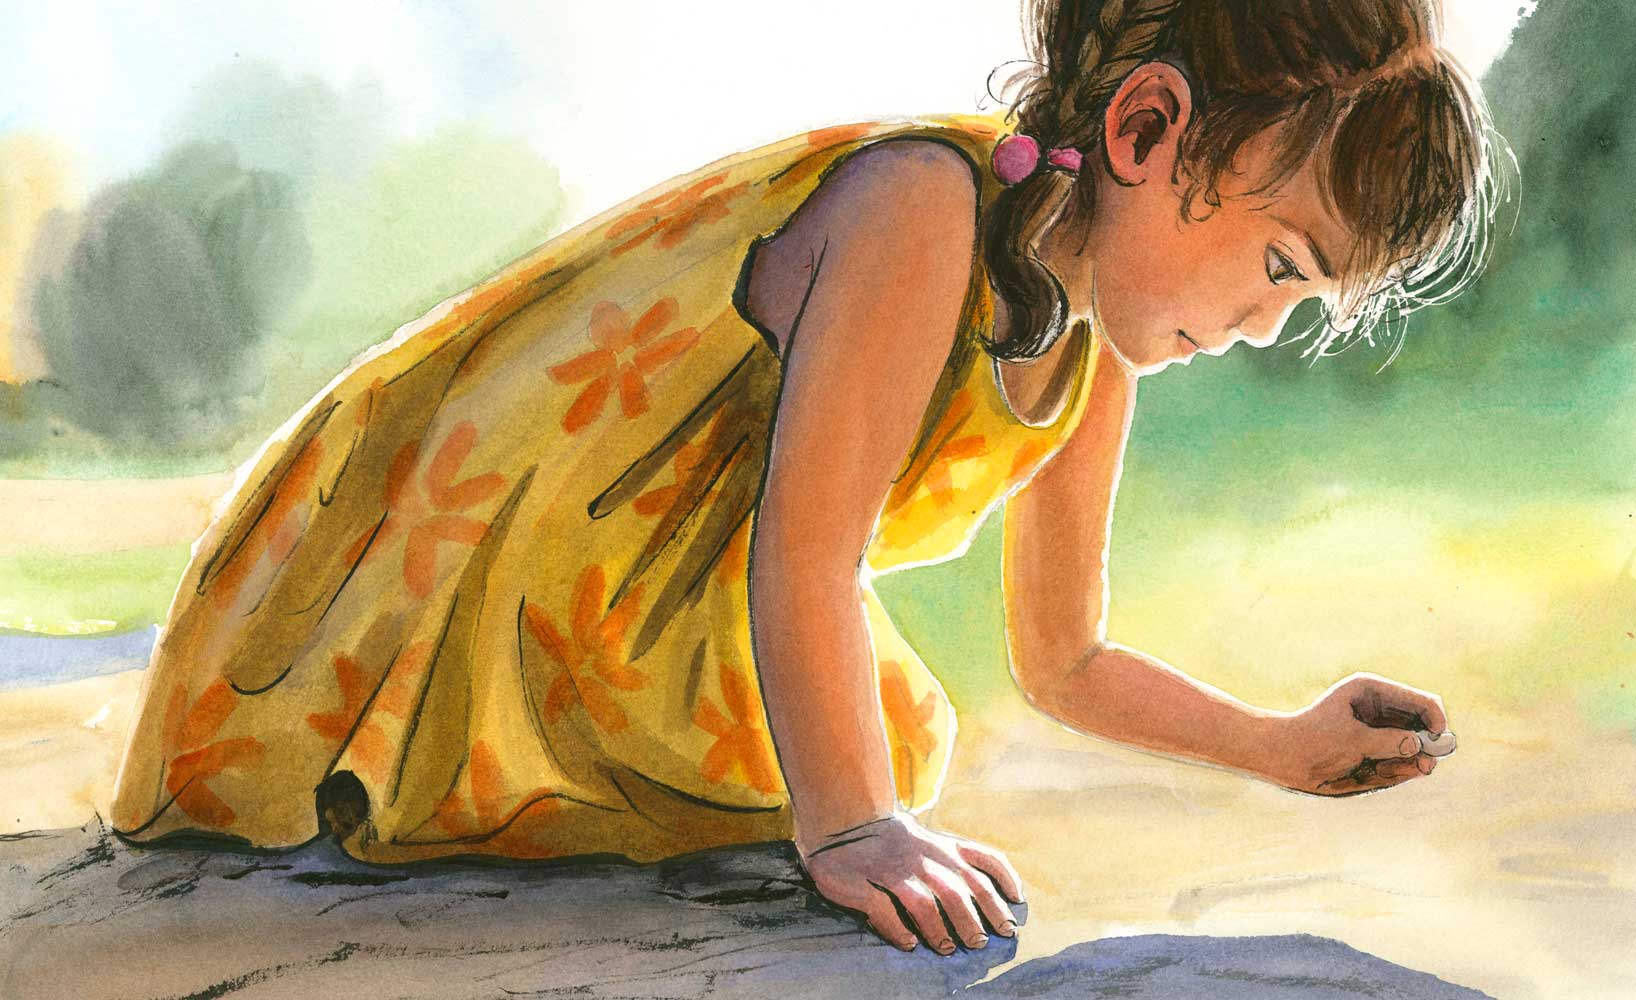 Watercolor illustration by Jessica Lanan from 'Jumper: A Day in the Life of a Backyard Jumping Spider' showing a girl in a sleeveless sundress kneeling on the ground in profile with sunlight behind her. She is picking up a small bean off the ground and looking at it.